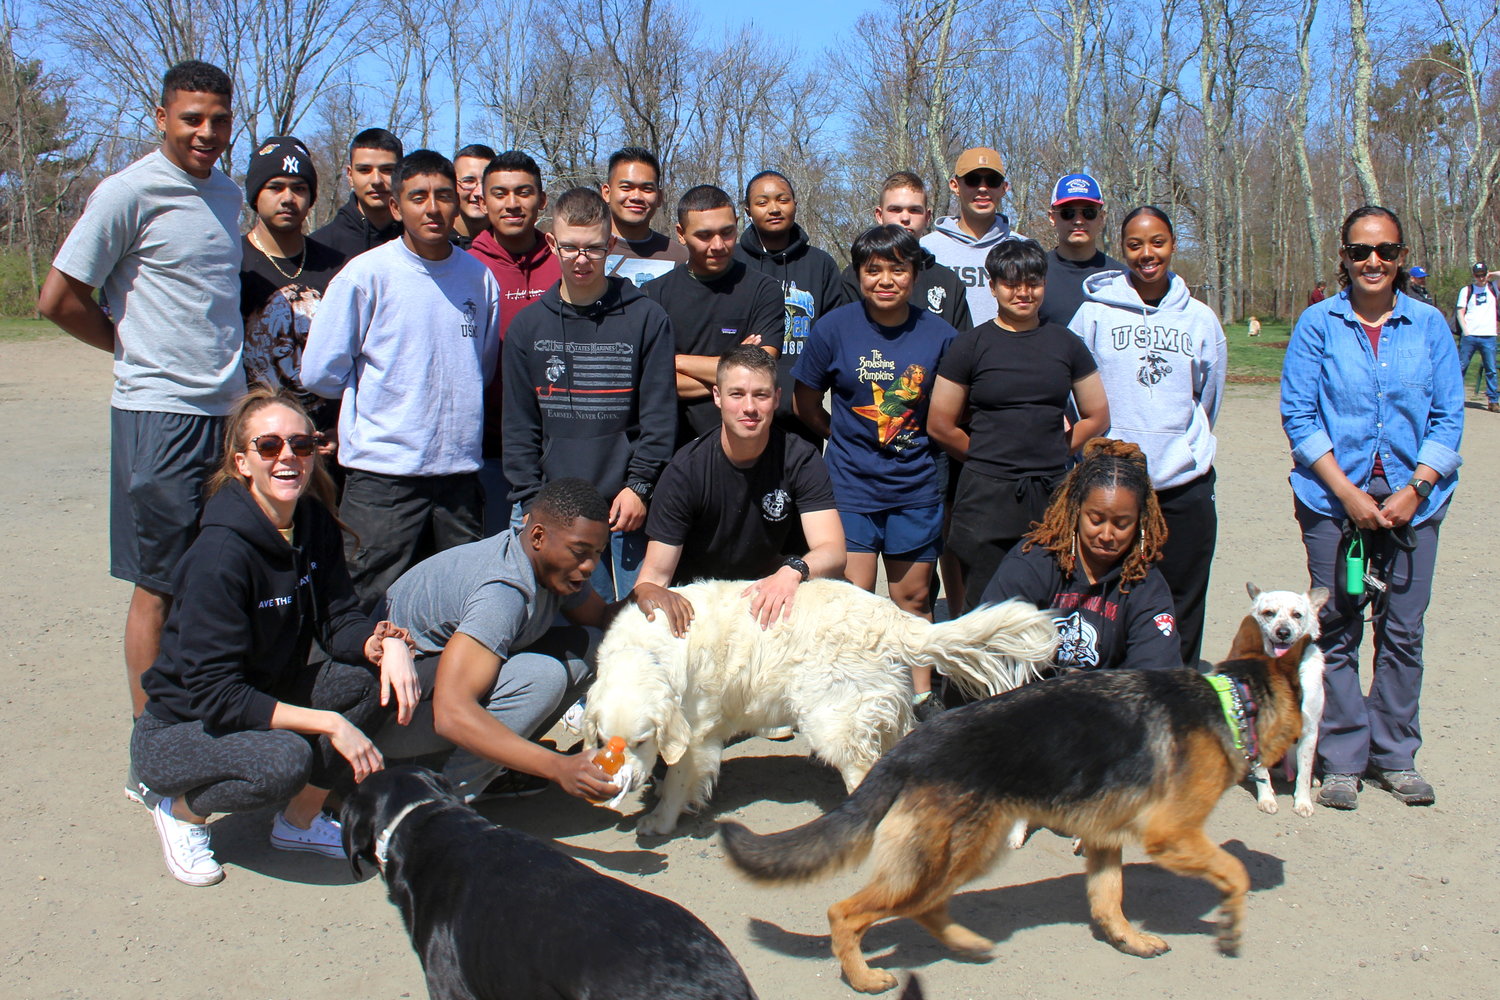 Nearly two dozen Marines from the Naval Justice School helped out during the cleanup at the Portsmouth Dog Park on Saturday.